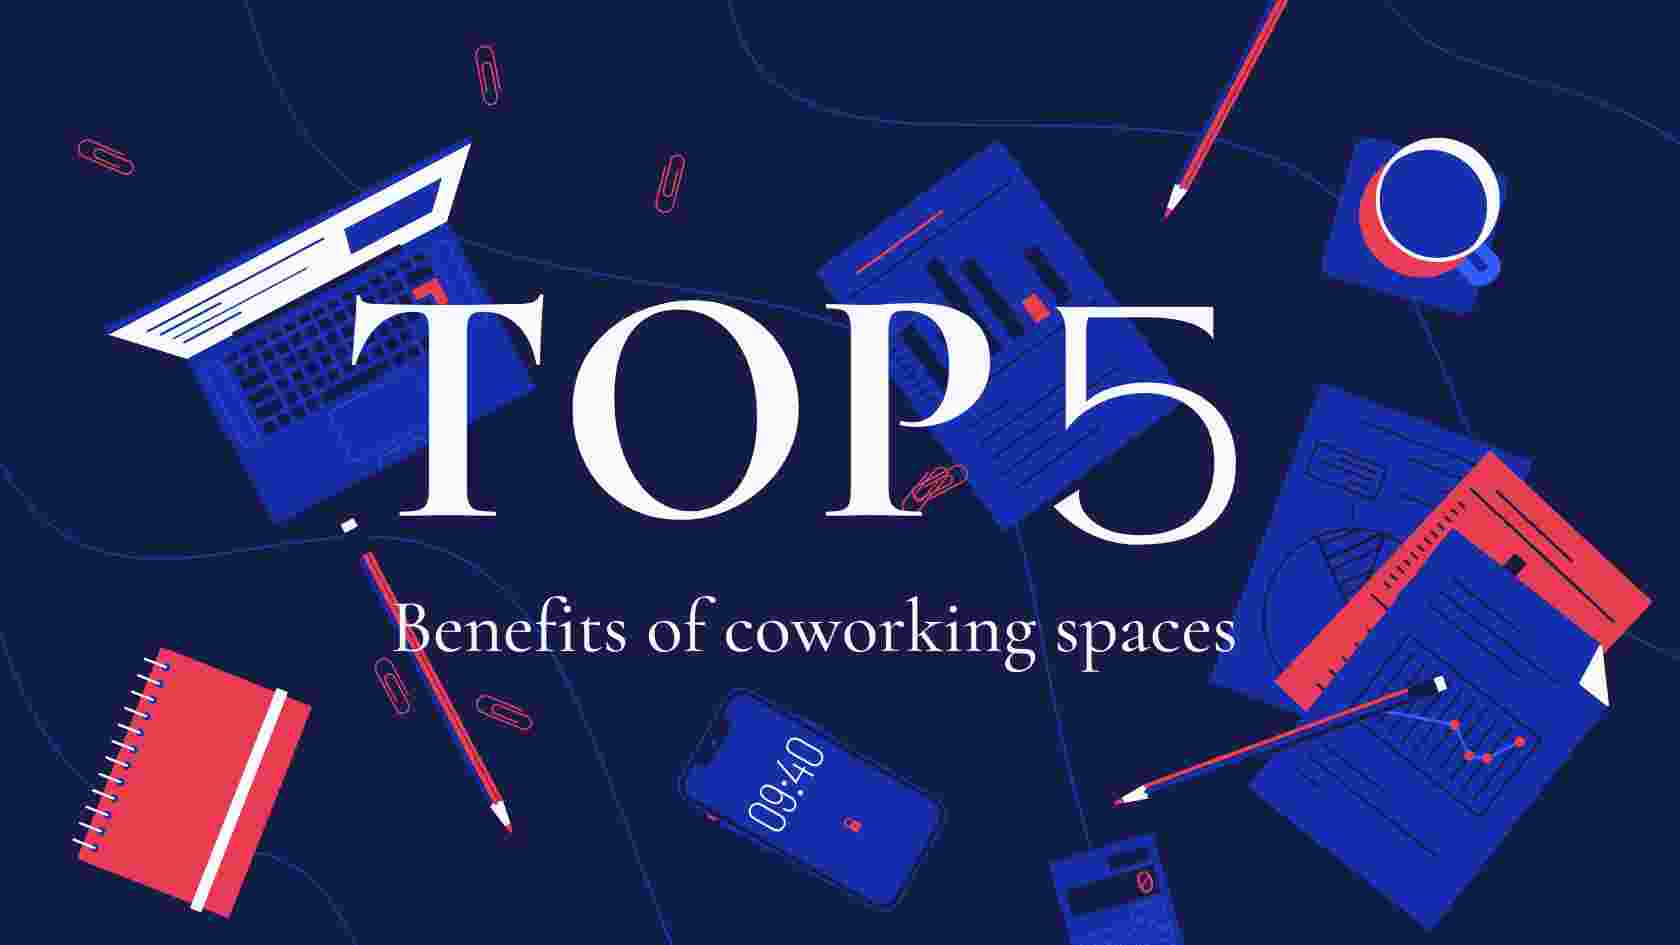 Explore the unparalleled advantages of coworking spaces for businesses, entrepreneurs, and freelancers.